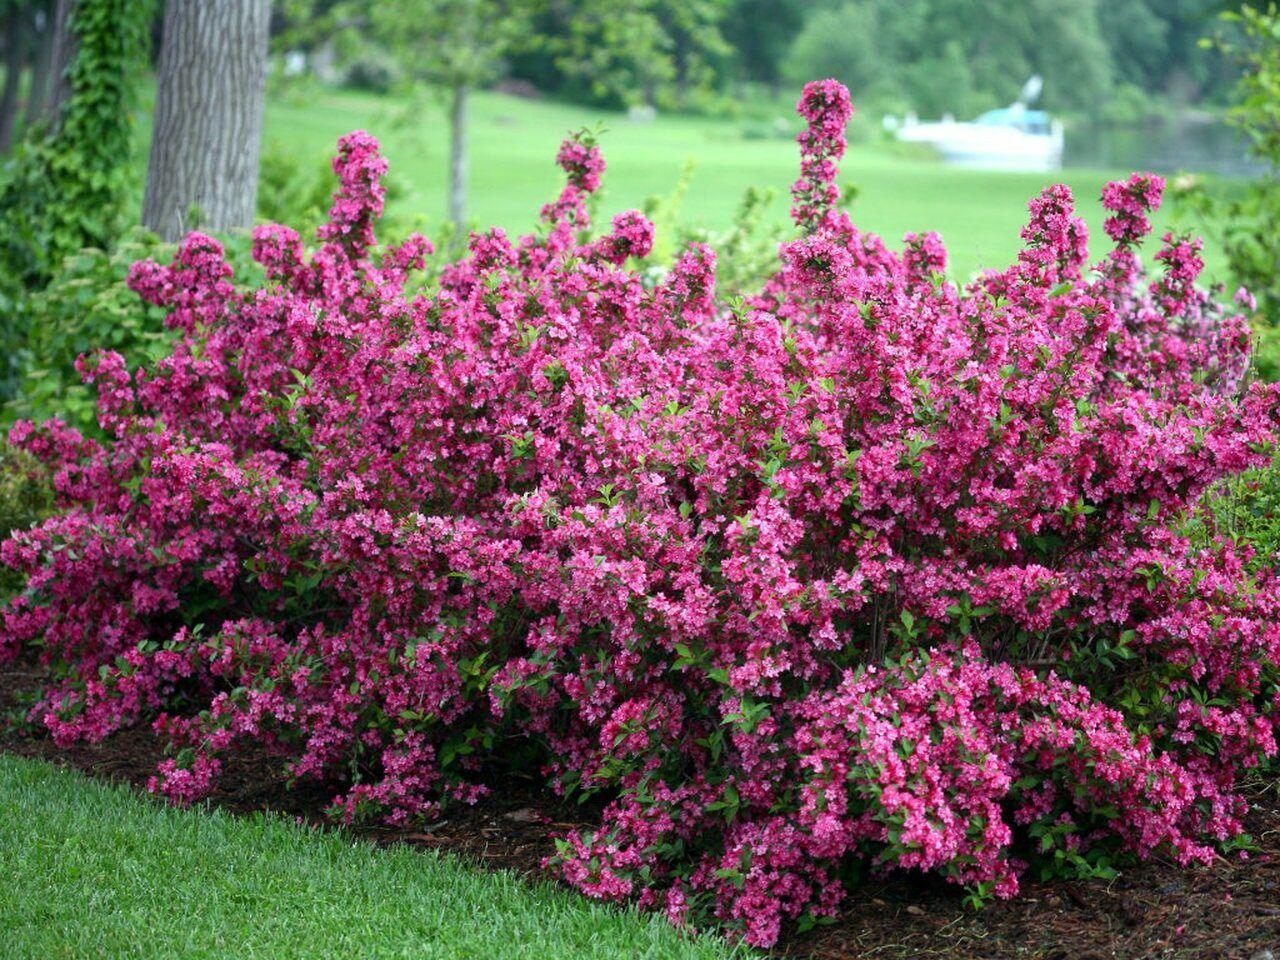 2 Pink Weigela Shrubs/Bushes - 6-12" Tall Live Plants - Seedlings in 4" Pots - The Nursery Center